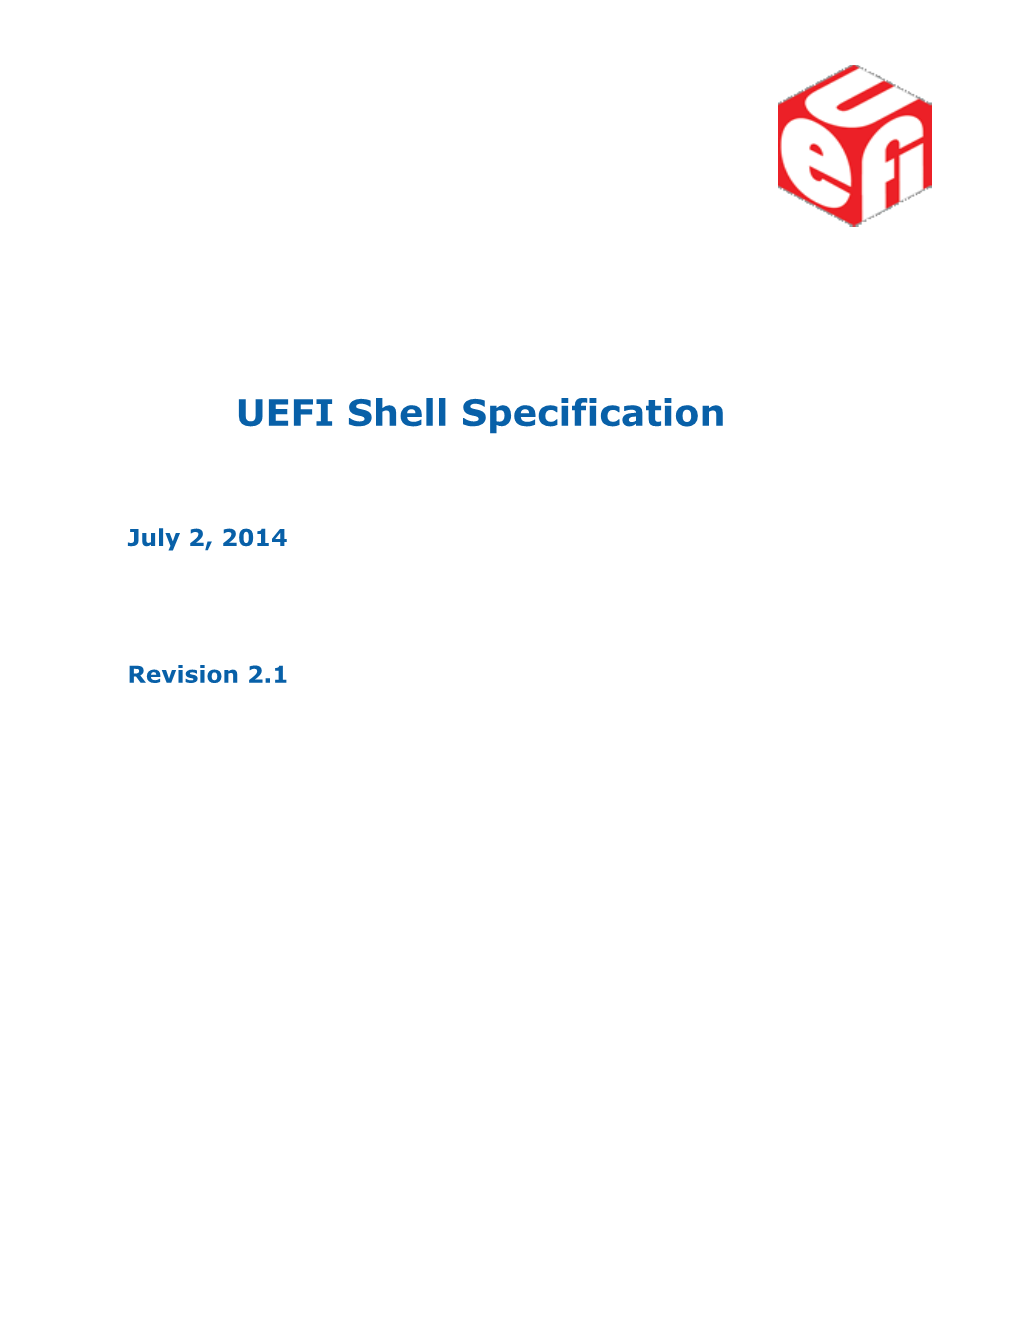 UEFI Shell Specification